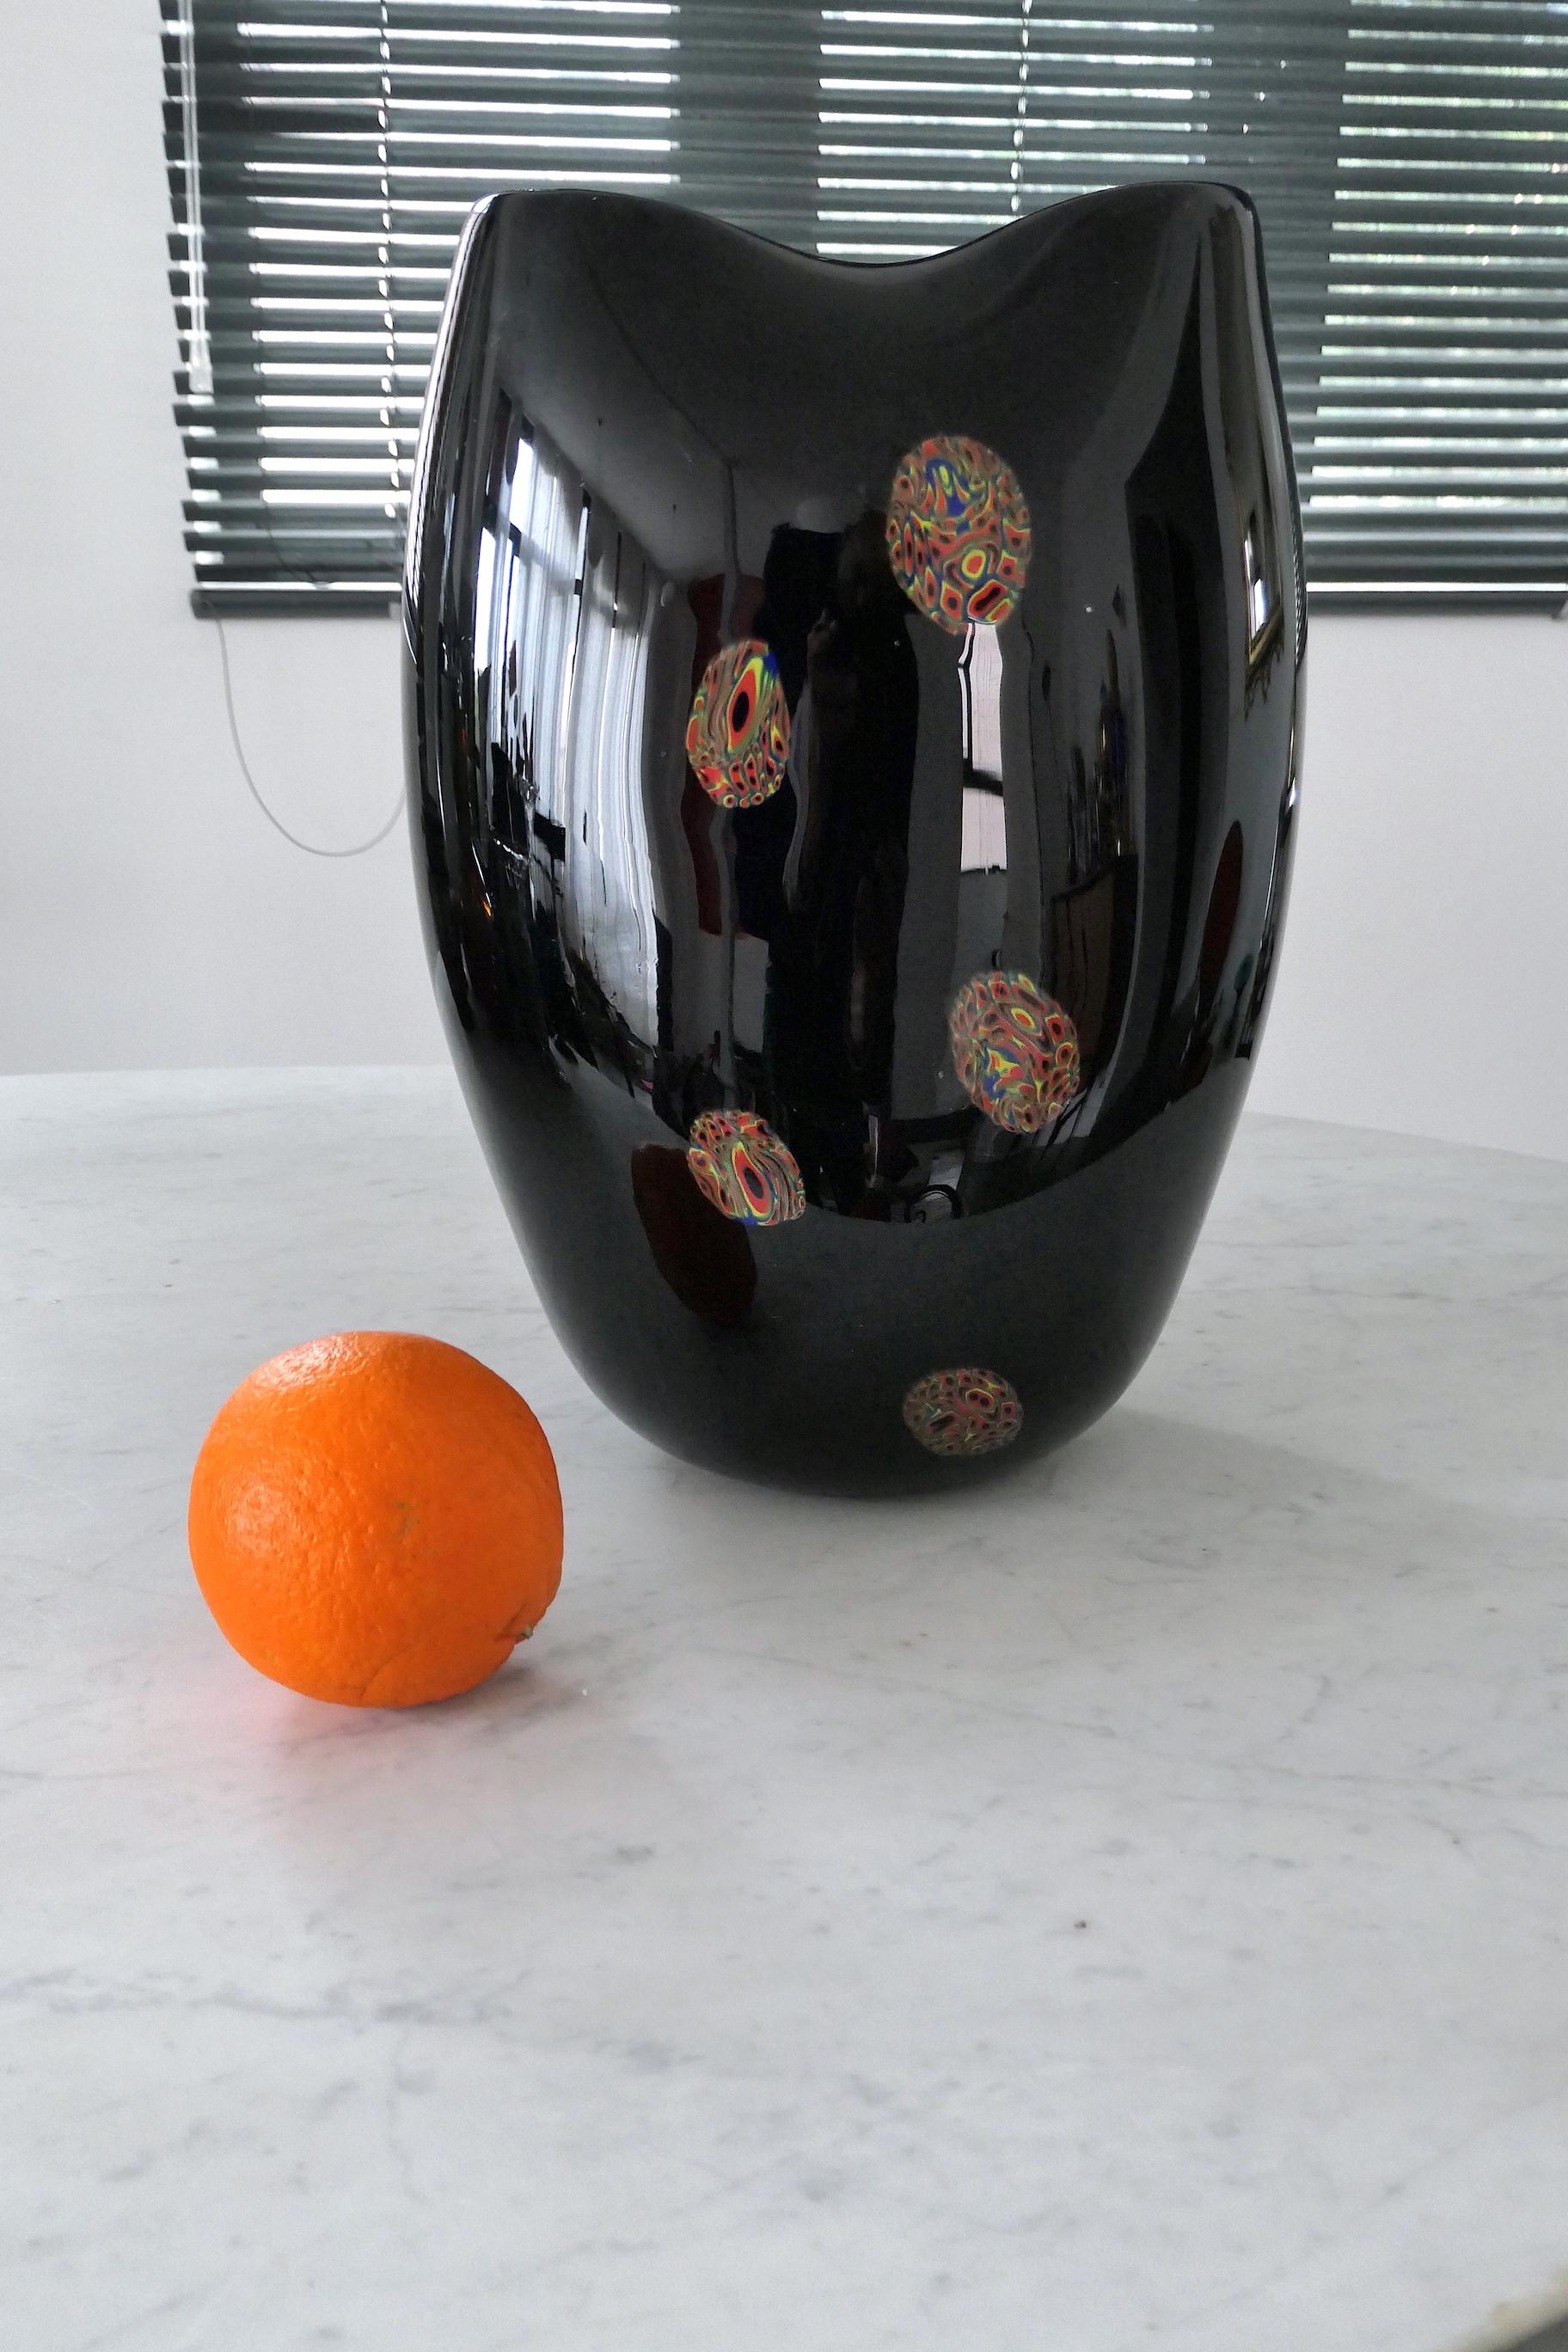 A grand Italian 20th century vintage Venetian Murano decorative vase crafted in Sommerso technique with millefiori inspired specks of bright orange, yellow and blue.
Italy, circa 1970s.

-----
We are an exhibition space and an online destination